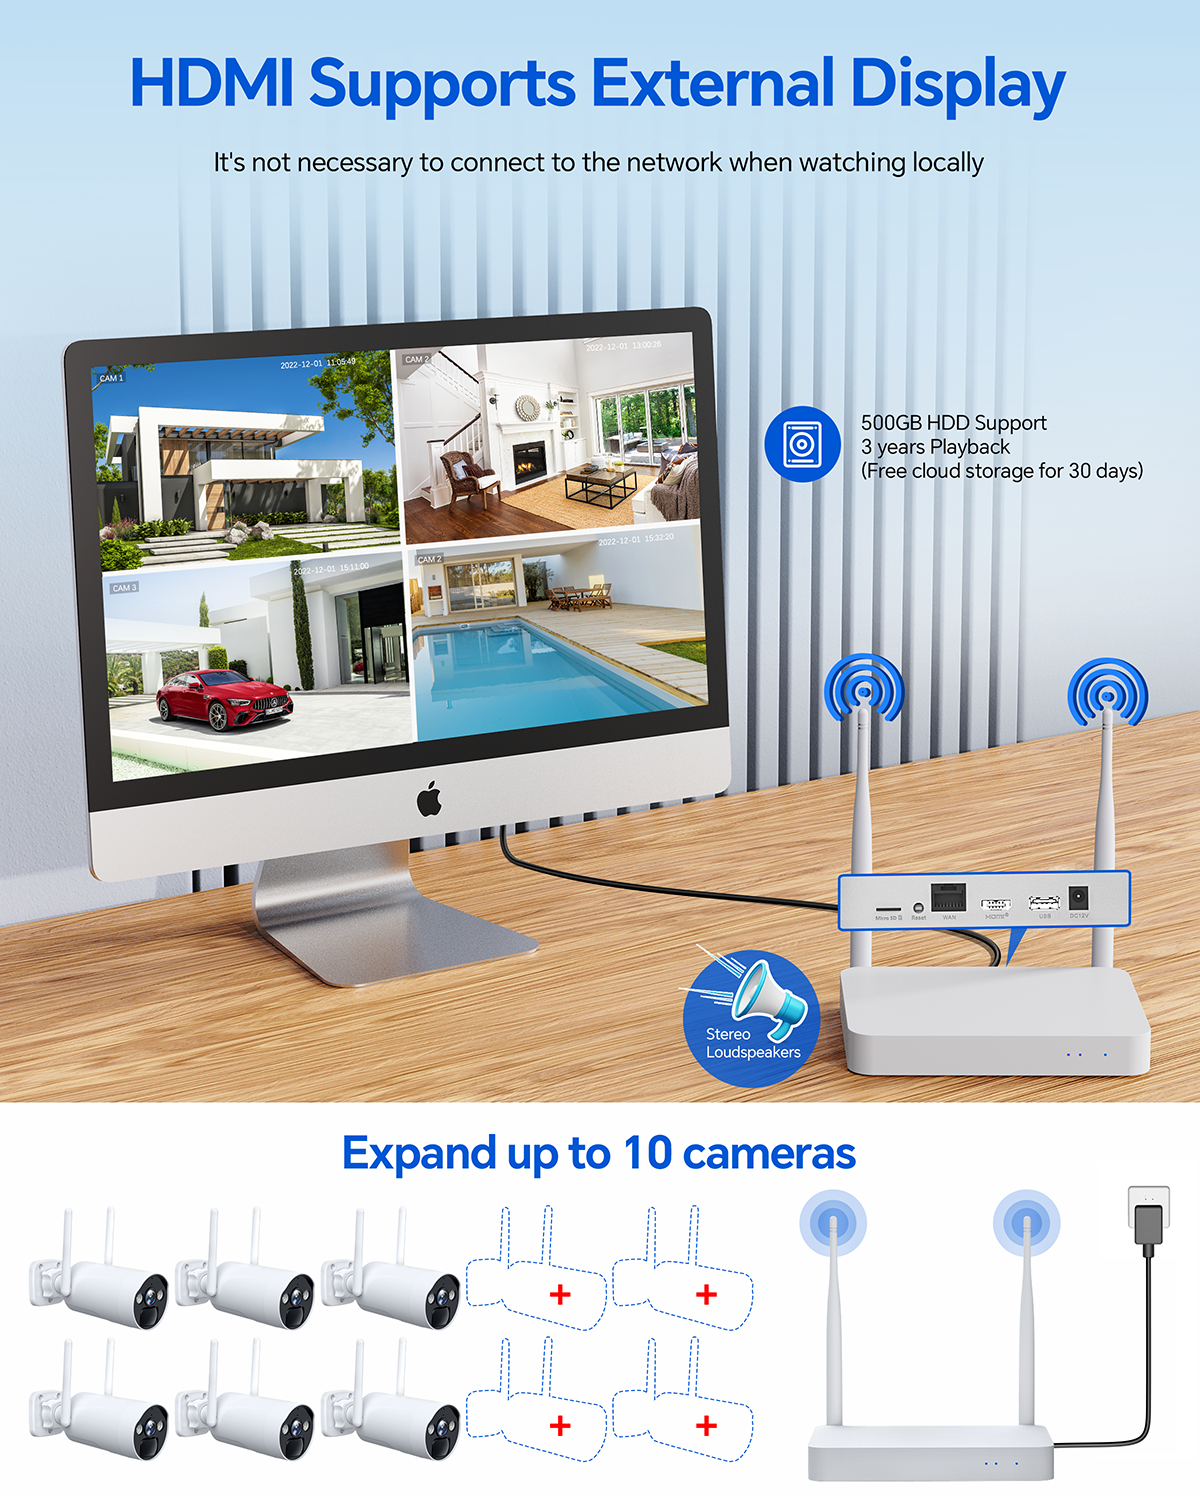 Toguard SC17 10CH 2K/4MP Solar Wireless Security Camera System Outdoor 8 Pcs Battery WiFi Bullet Surveillance Camera NVR HDMI Connector